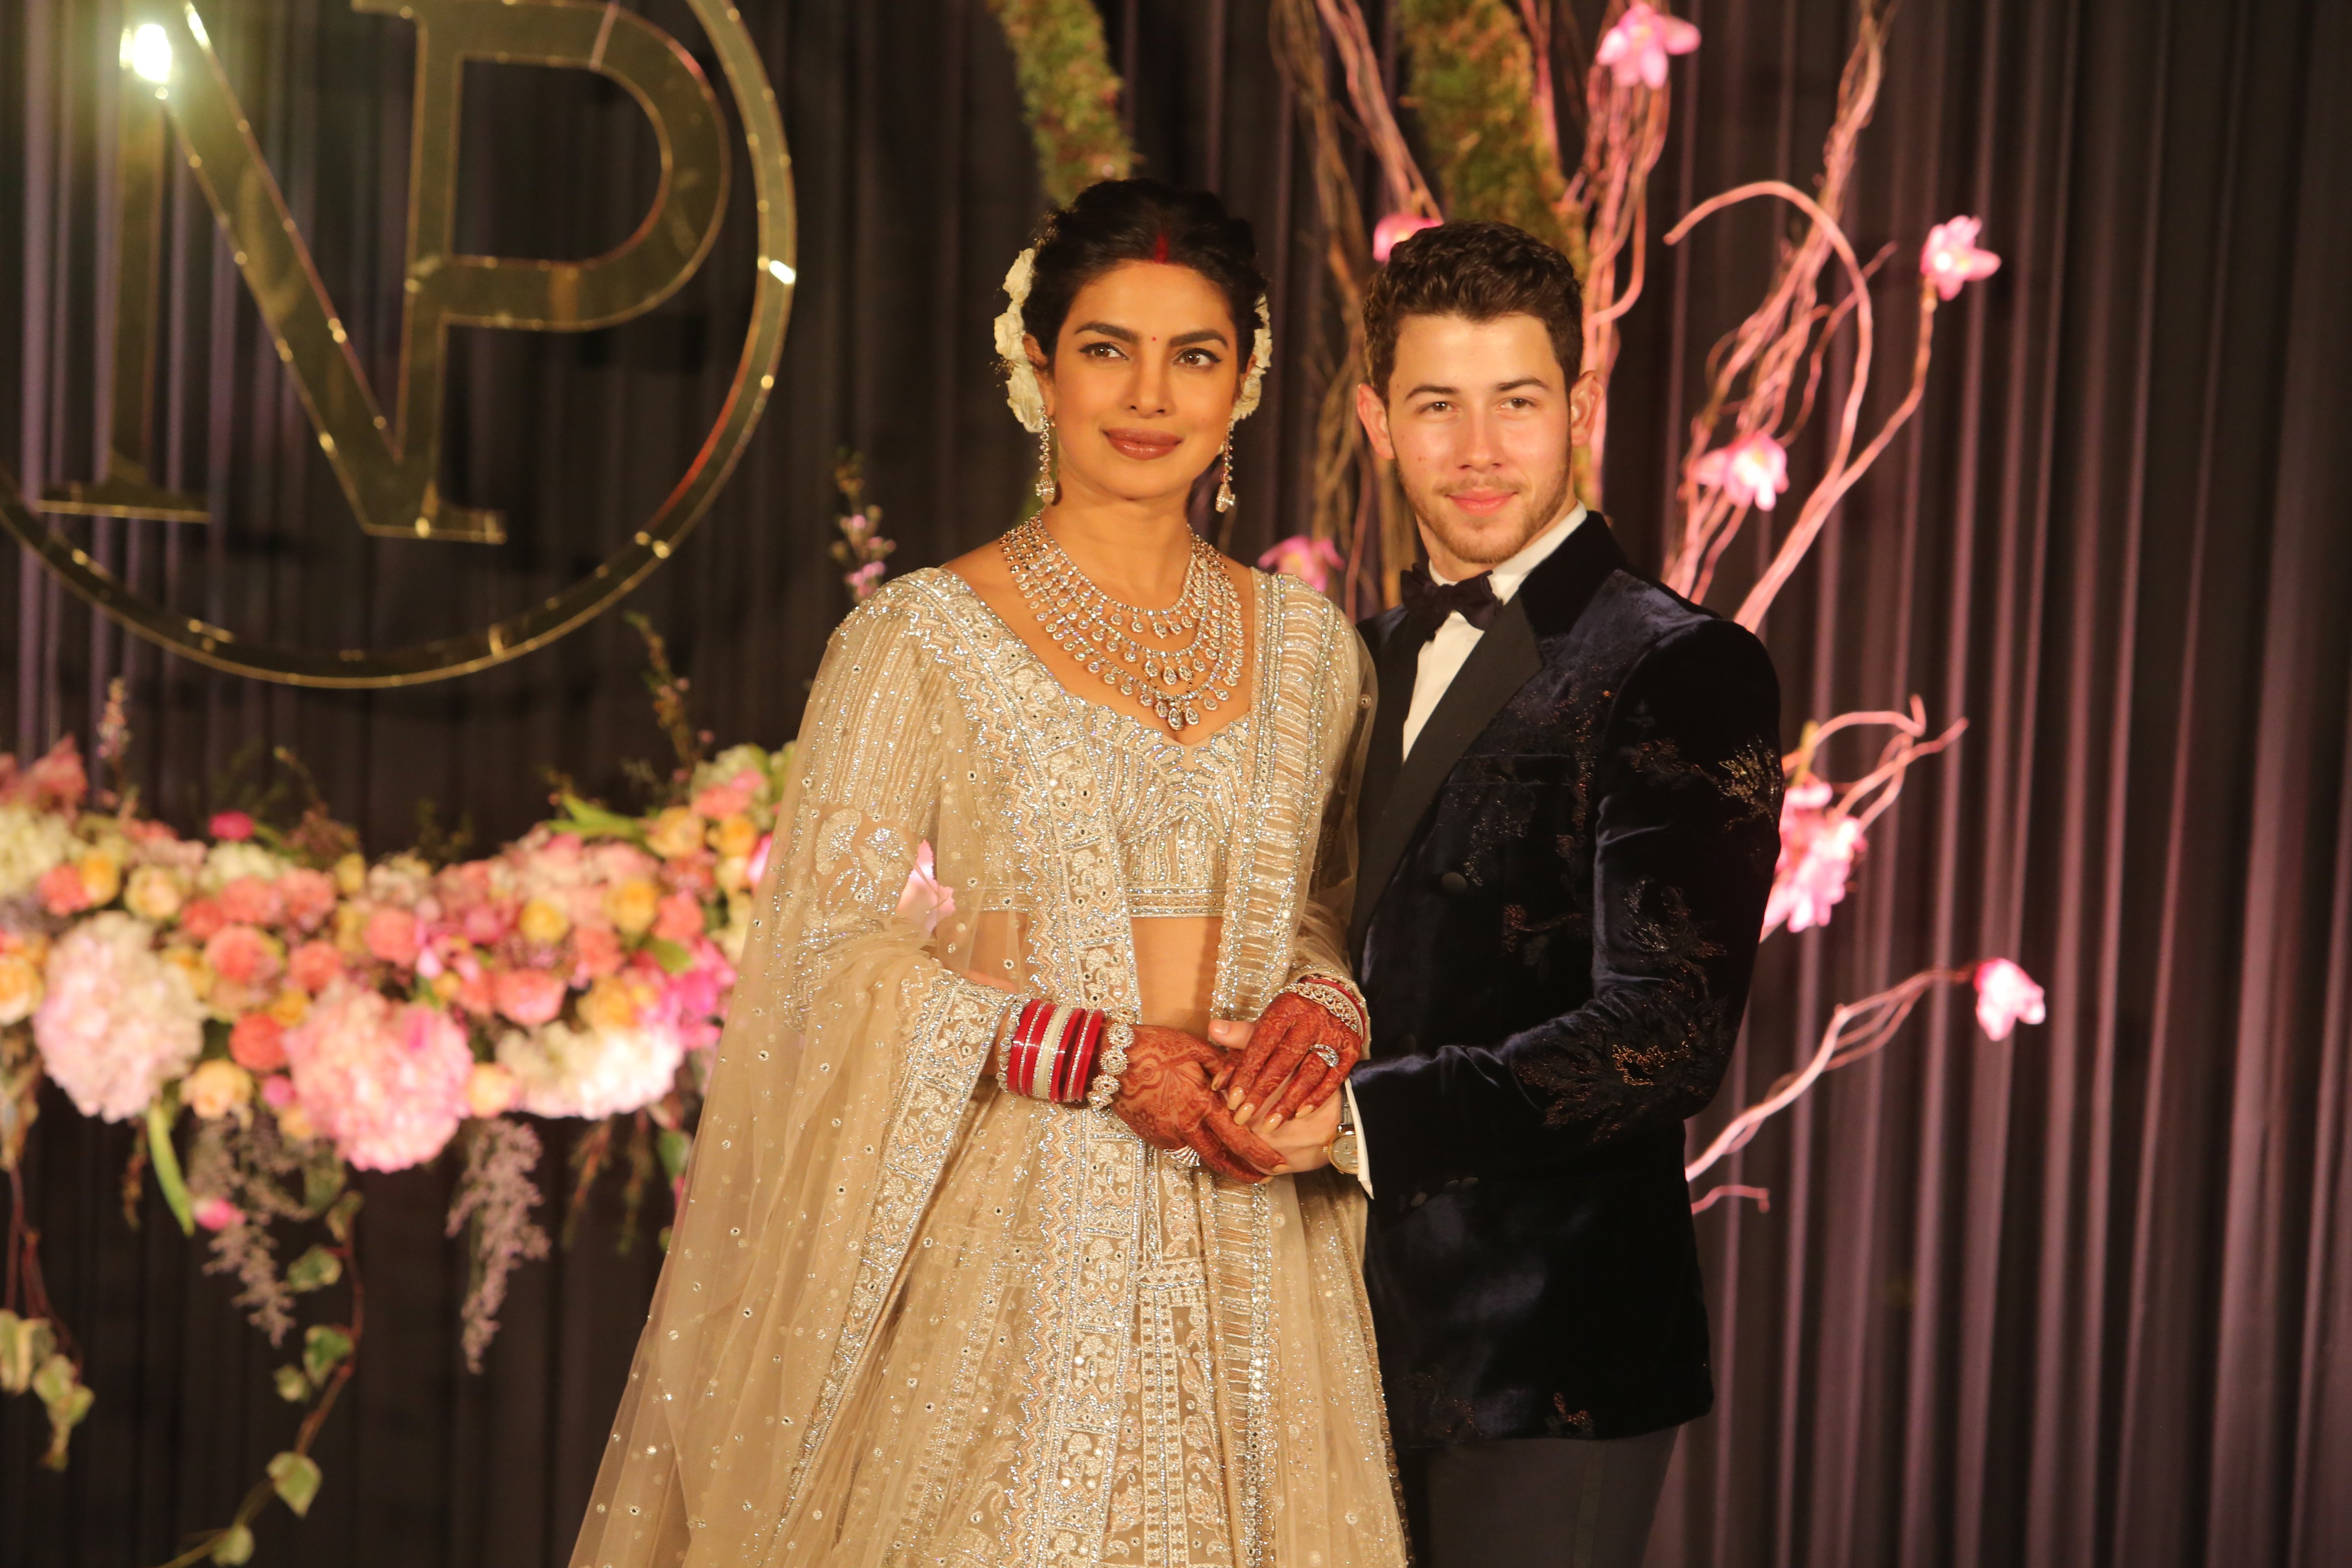 Newly-wed Bollywood actor Priyanka Chopra and American singer Nick Jonas pose for photos during their wedding reception, at Taj Palace on December 4, 2018 in New Delhi, India. (Hindustan Times&mdash;Hindustan Times via Getty Images)